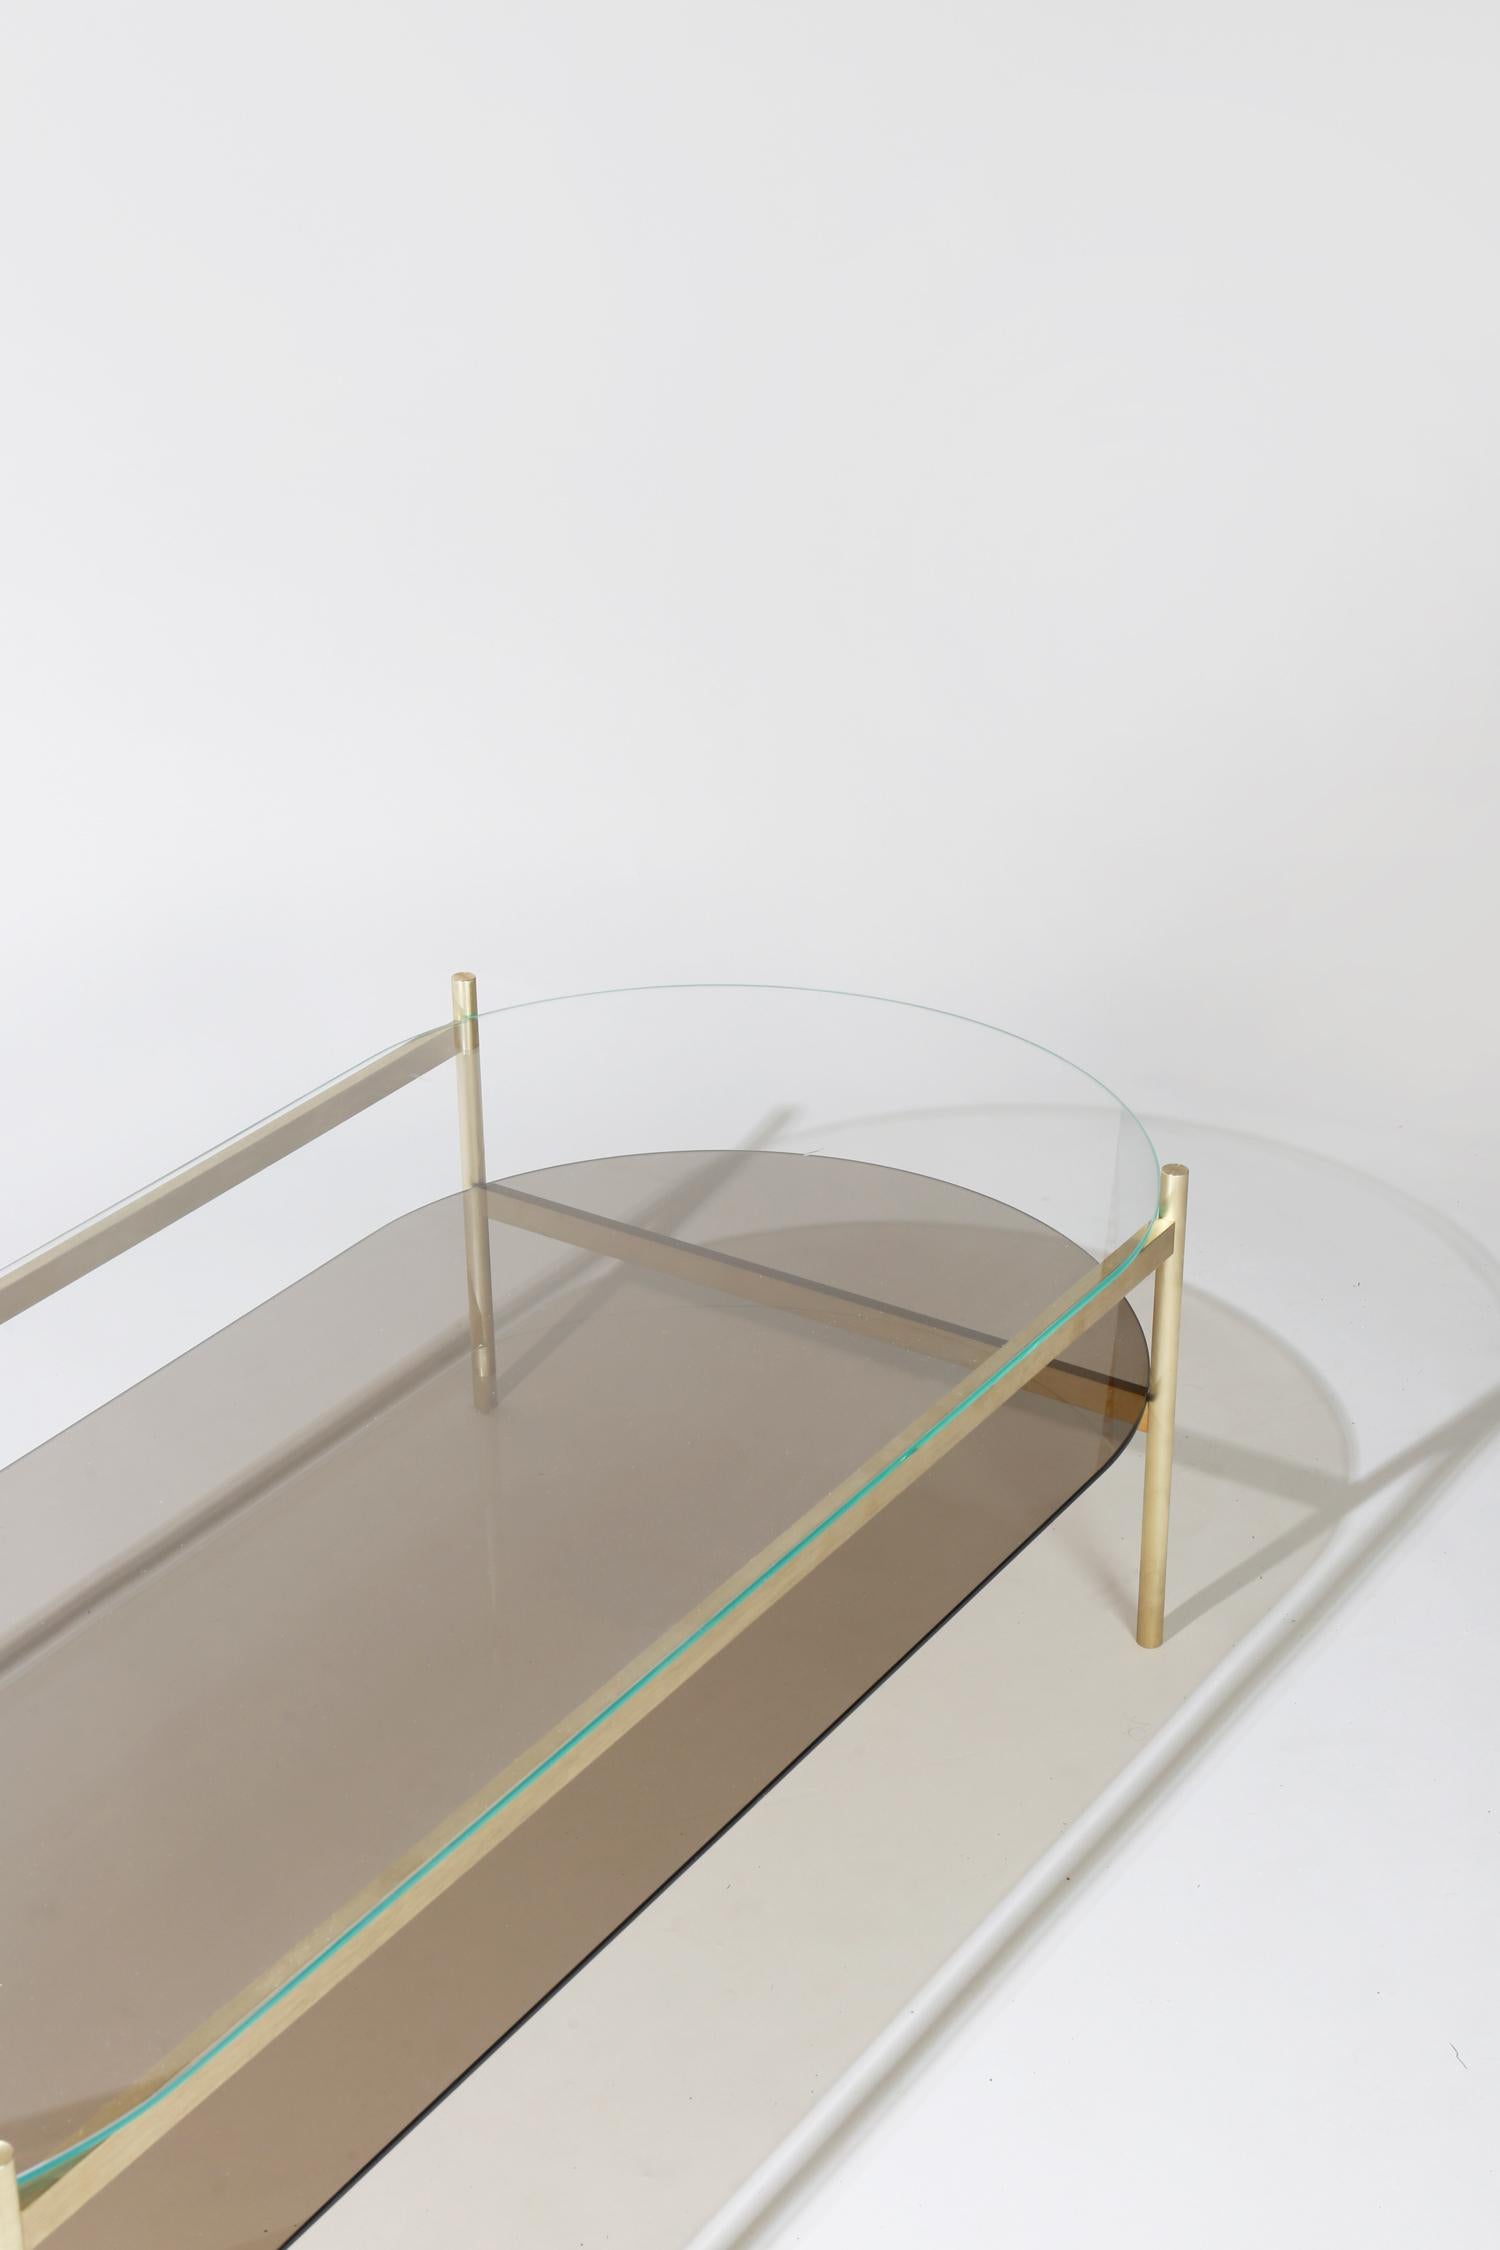 Made to order. Please allow 6 weeks for production.

Brass frame / clear glass / bronze glass

The Duotone coffee table is a commercial grade table made from precision machined solid brass. Each table is made locally in St. Augustine, Florida